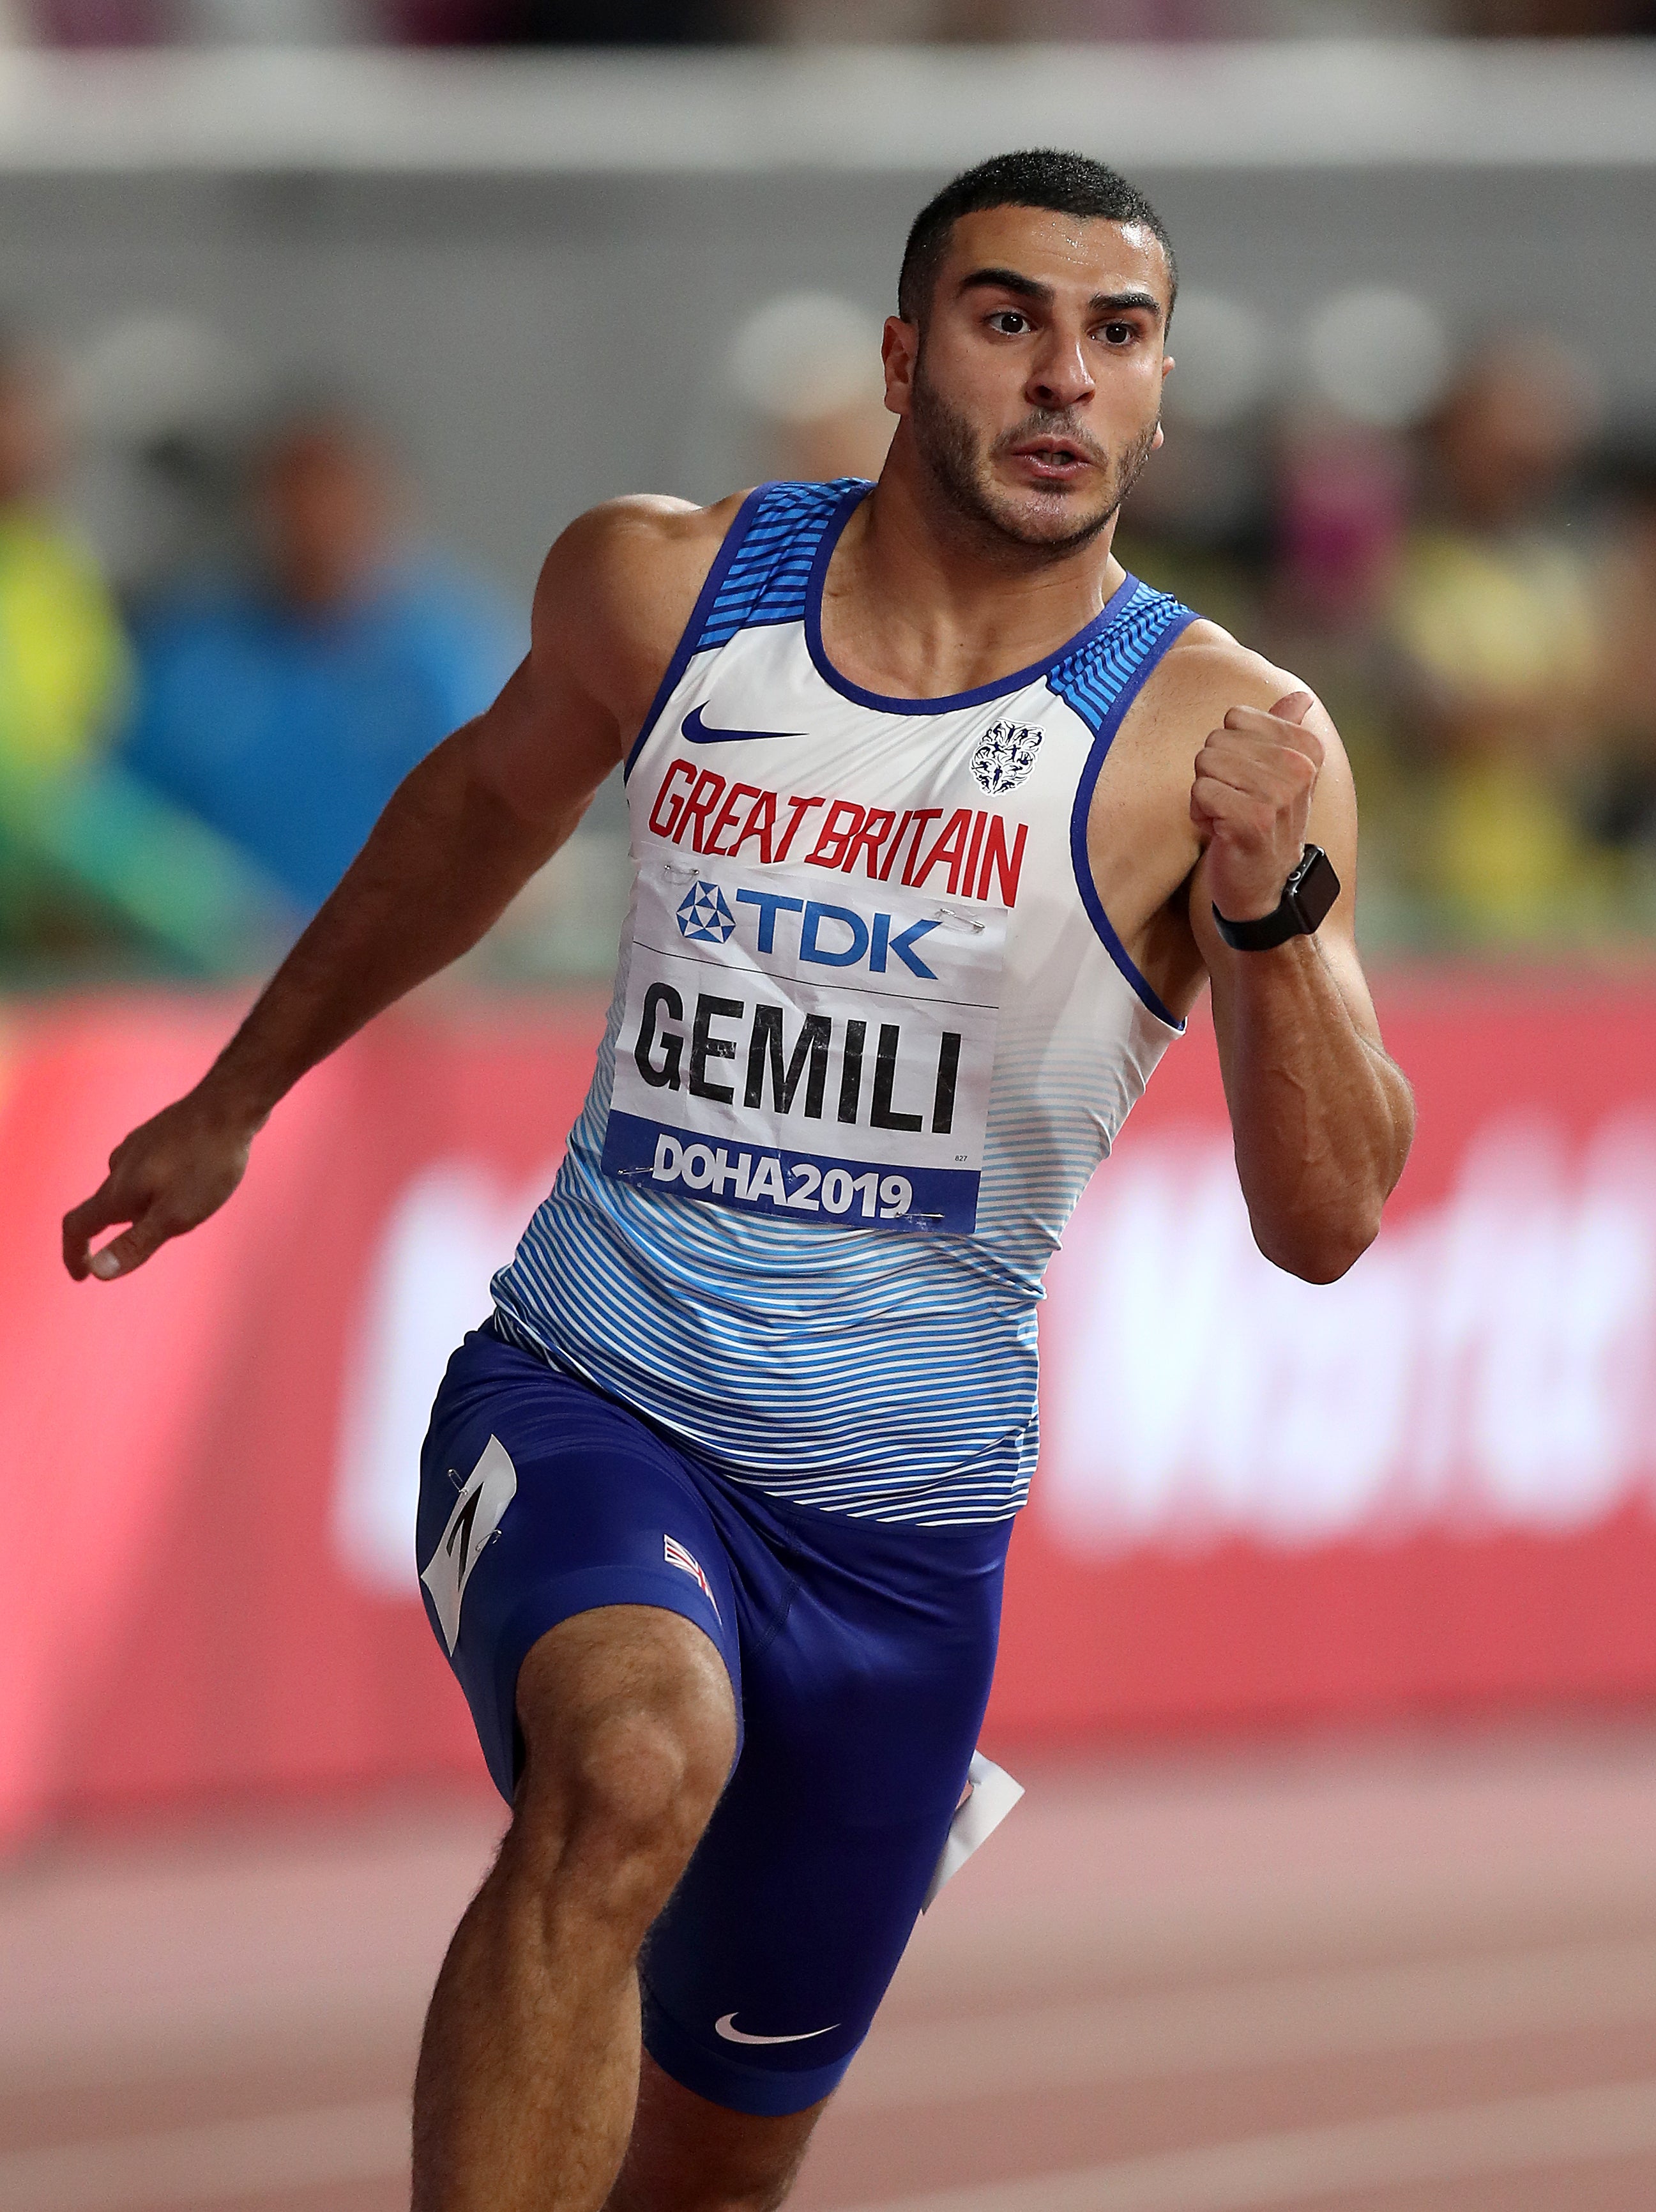 Adam Gemili competing at the 2019 World Championships in Doha